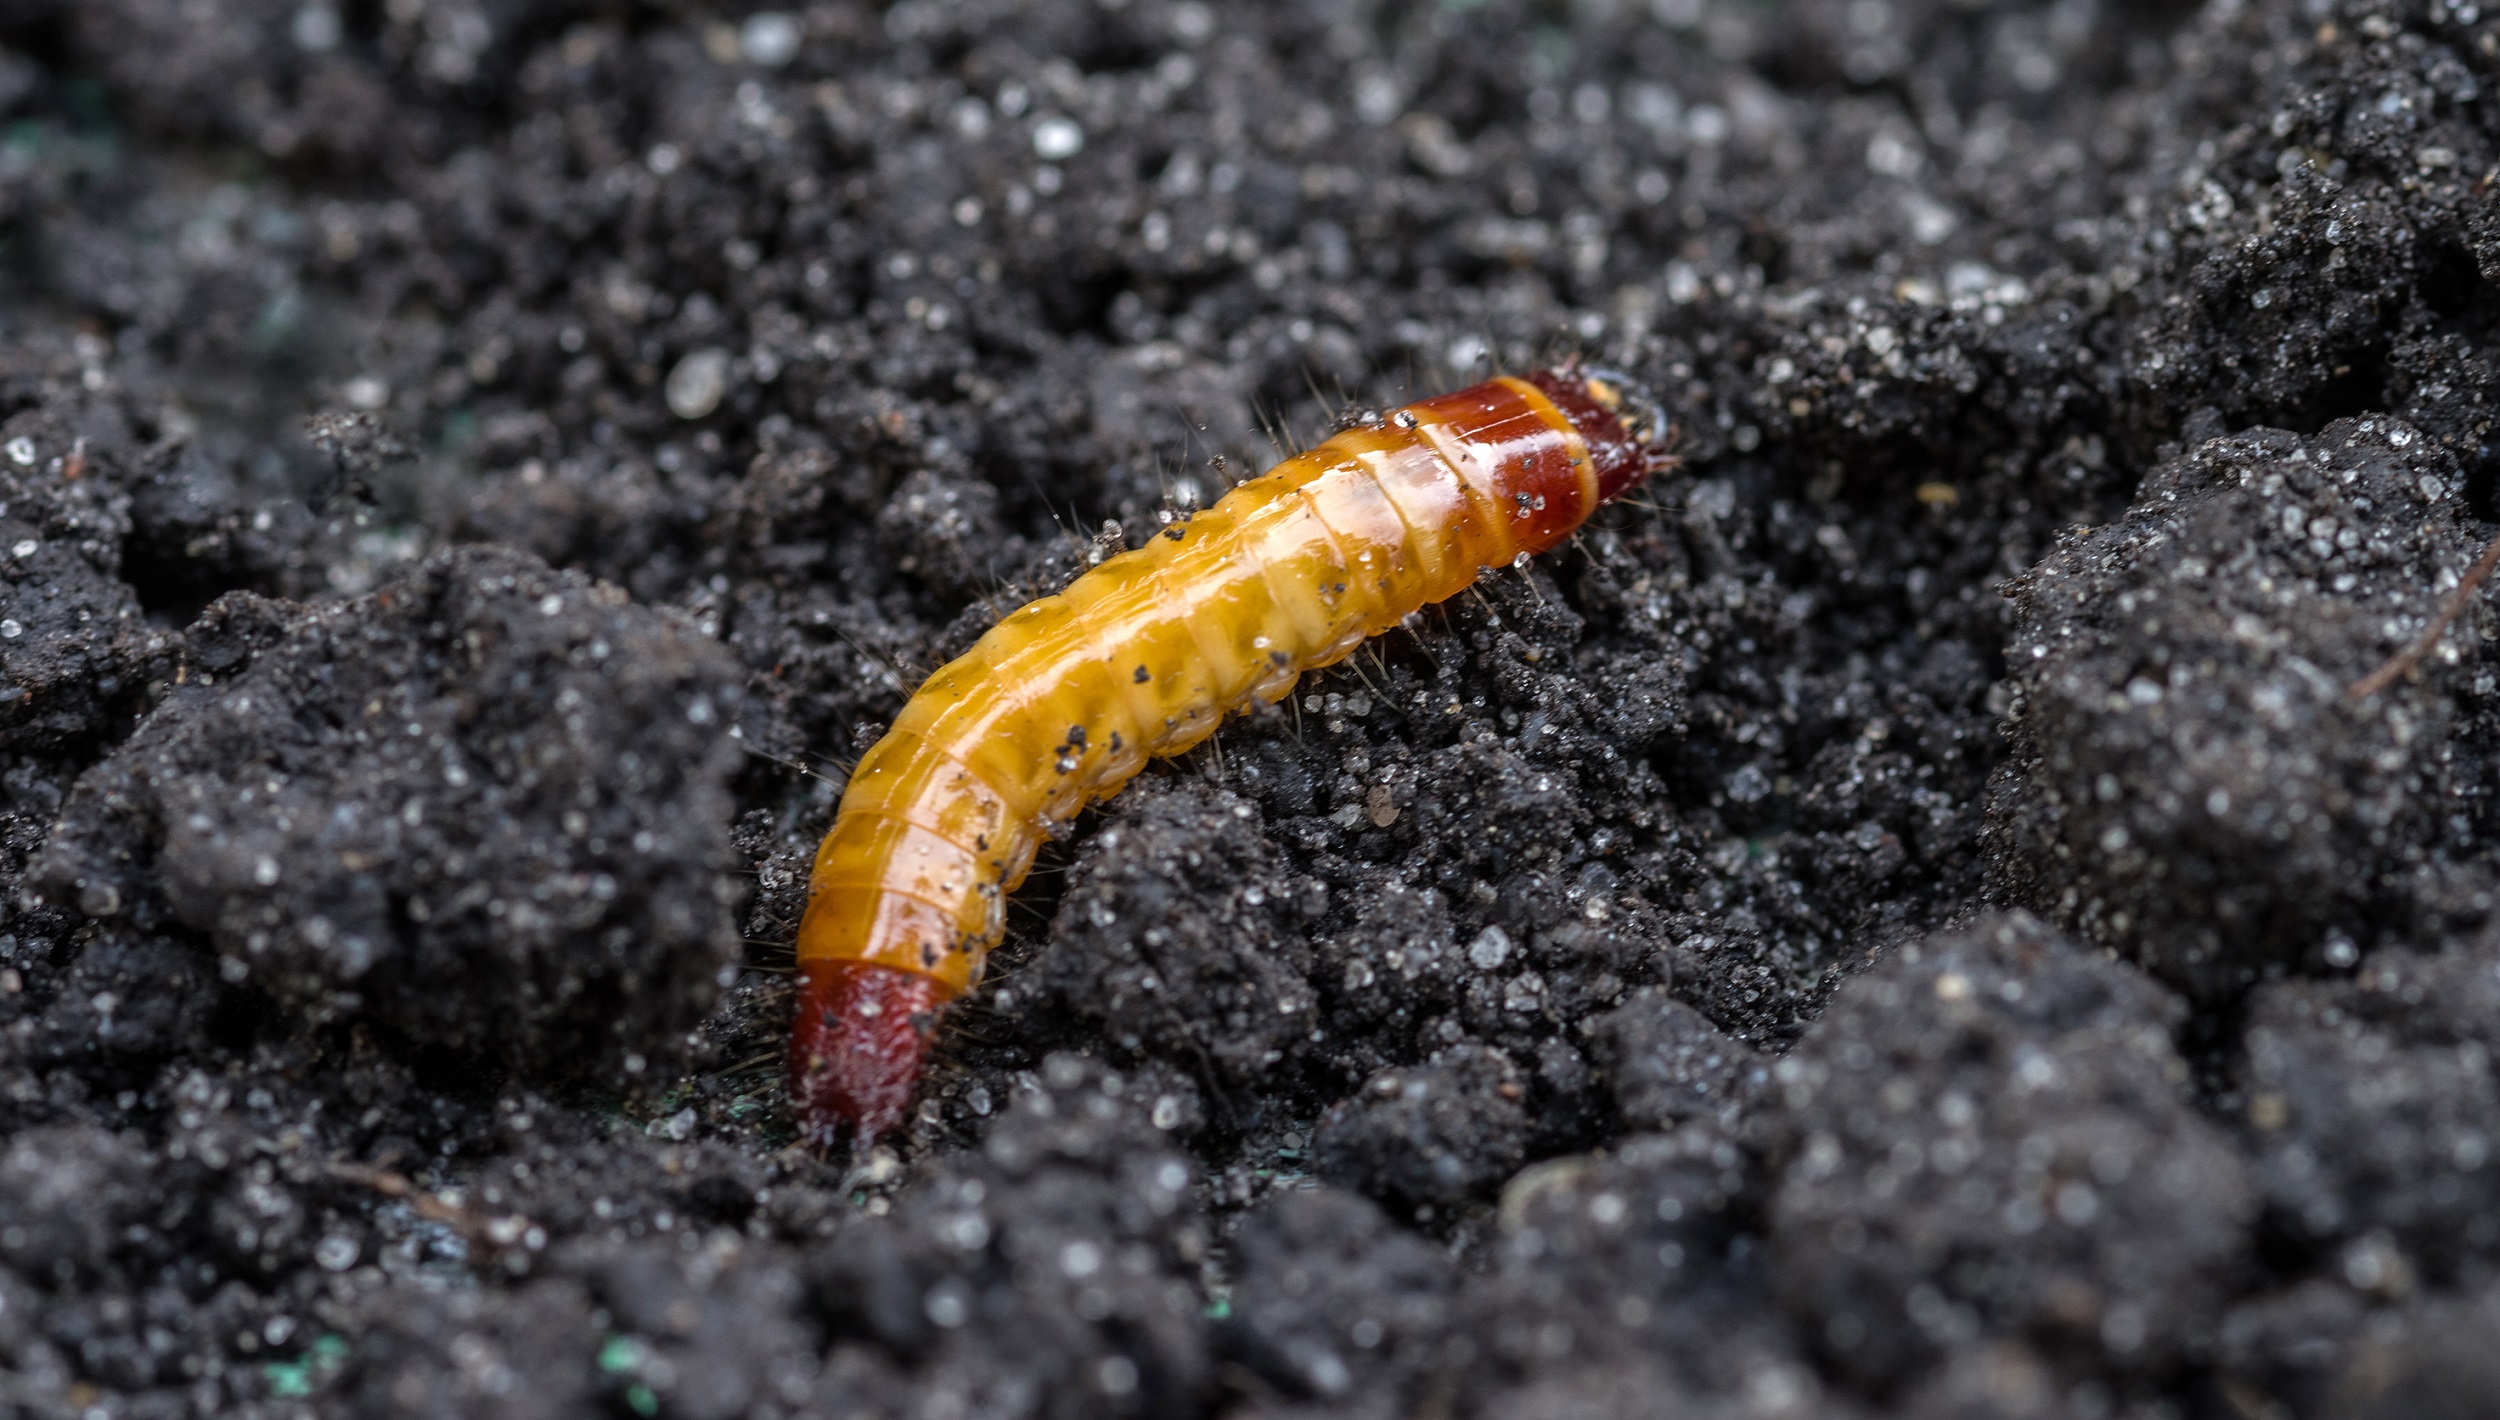 A close up picture of a wireworm on soil